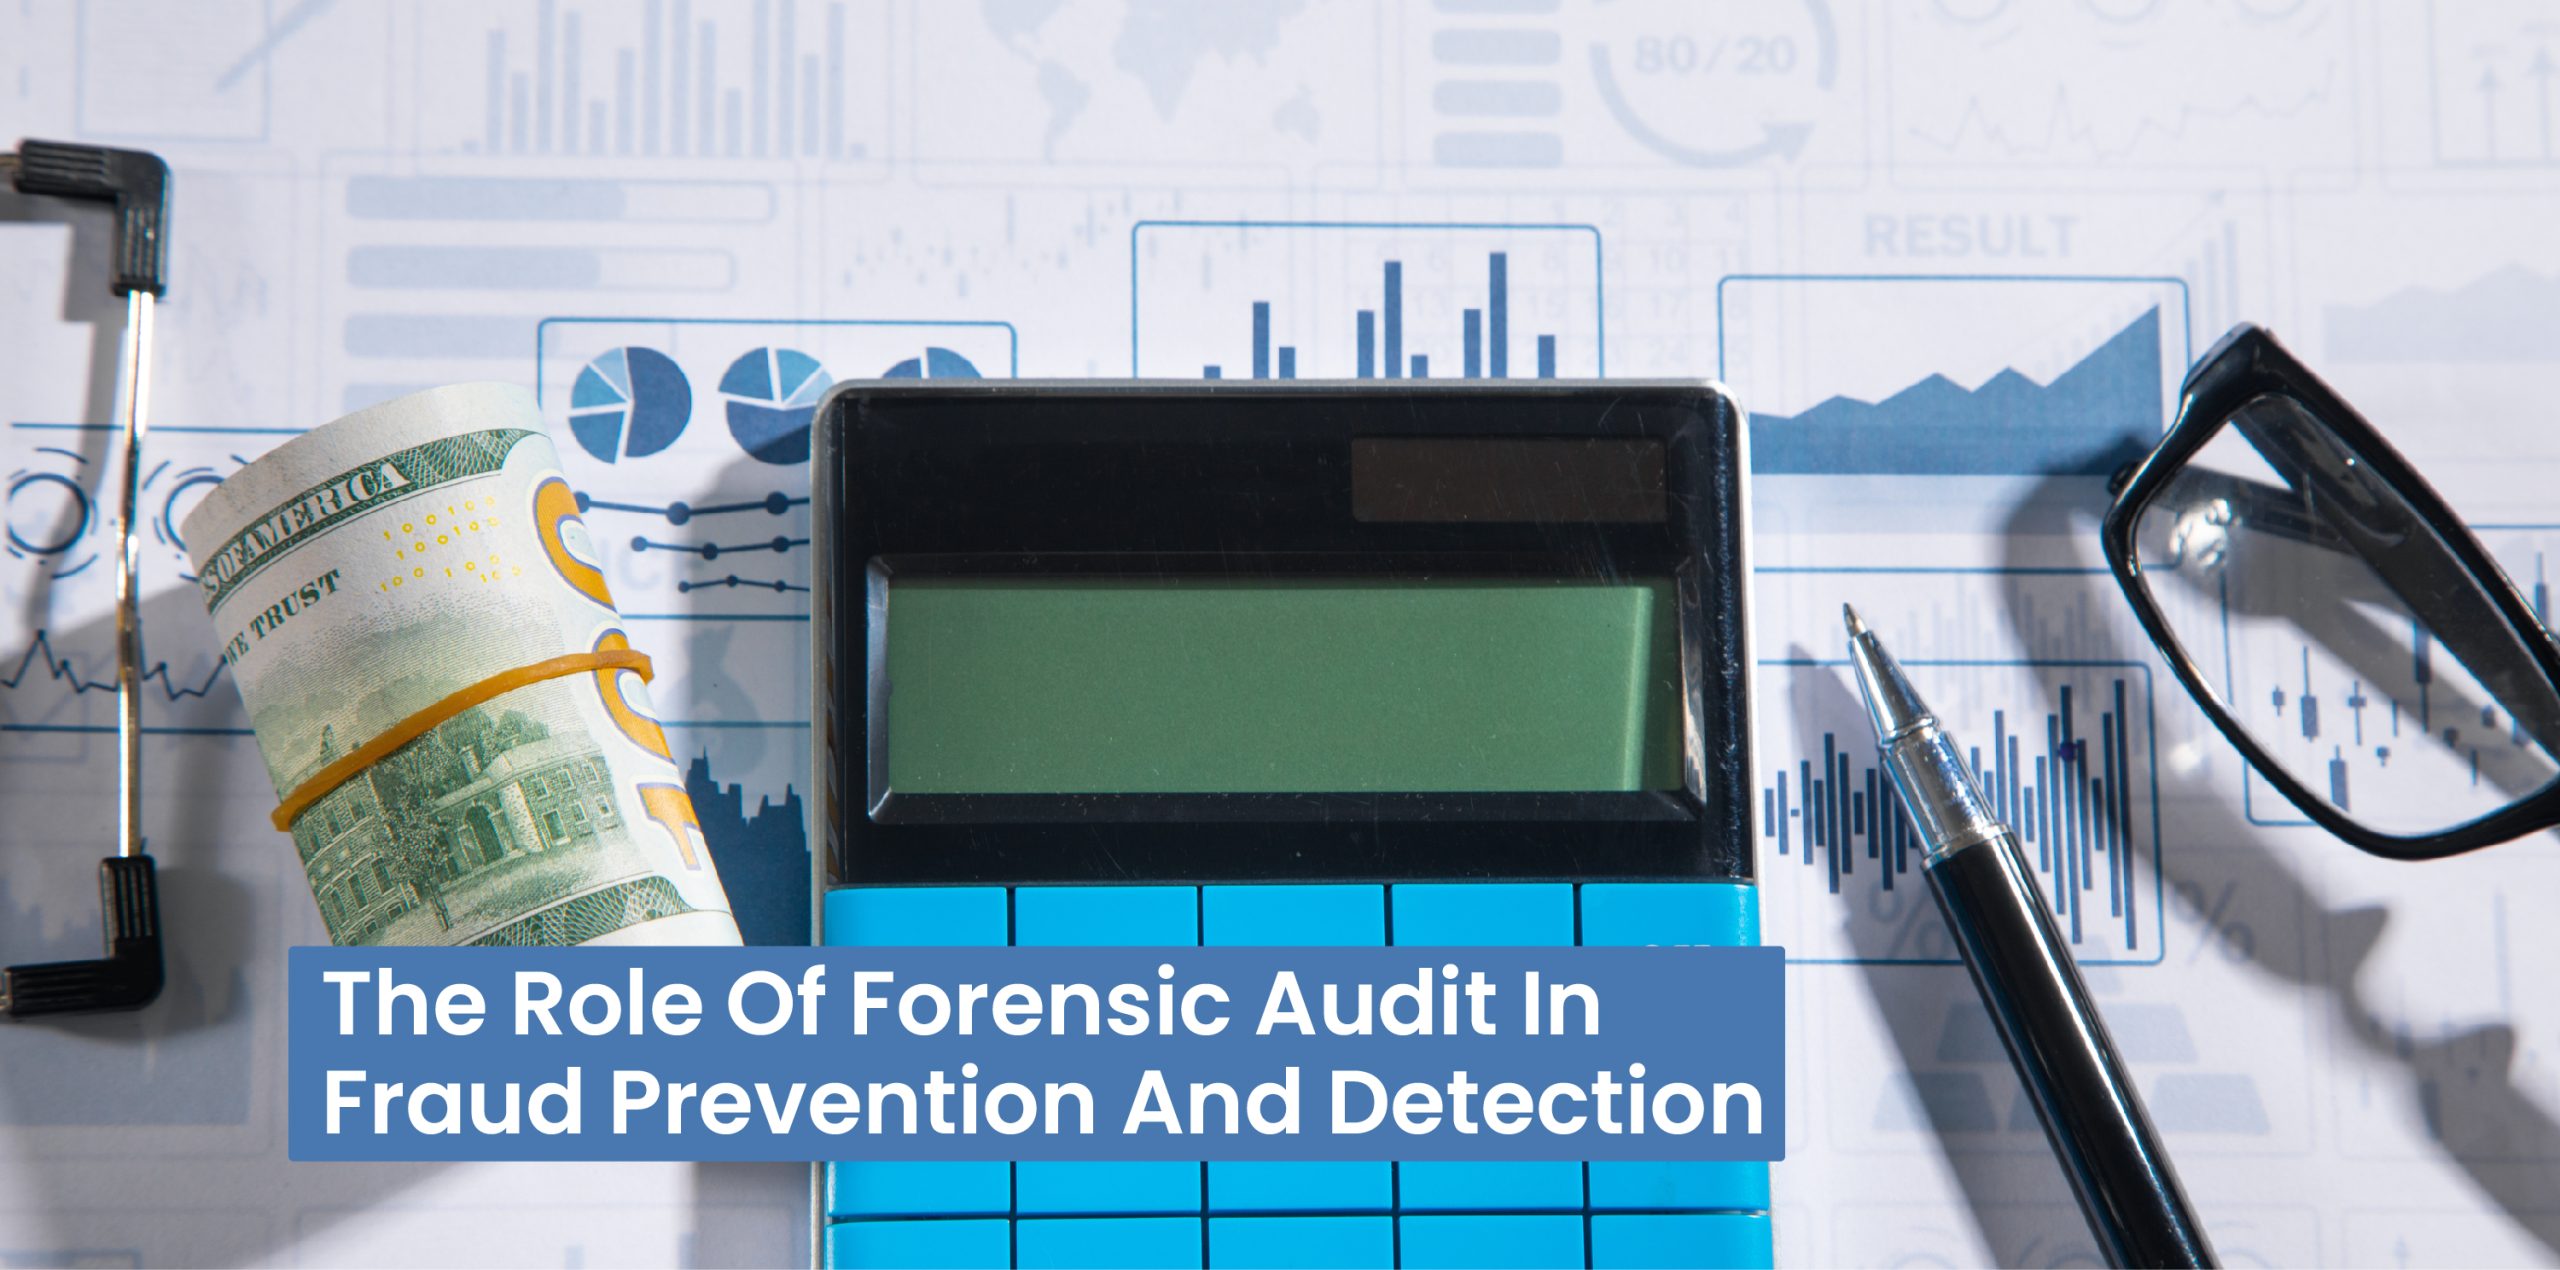 The Role of Forensic Audit in Fraud Prevention and Detection